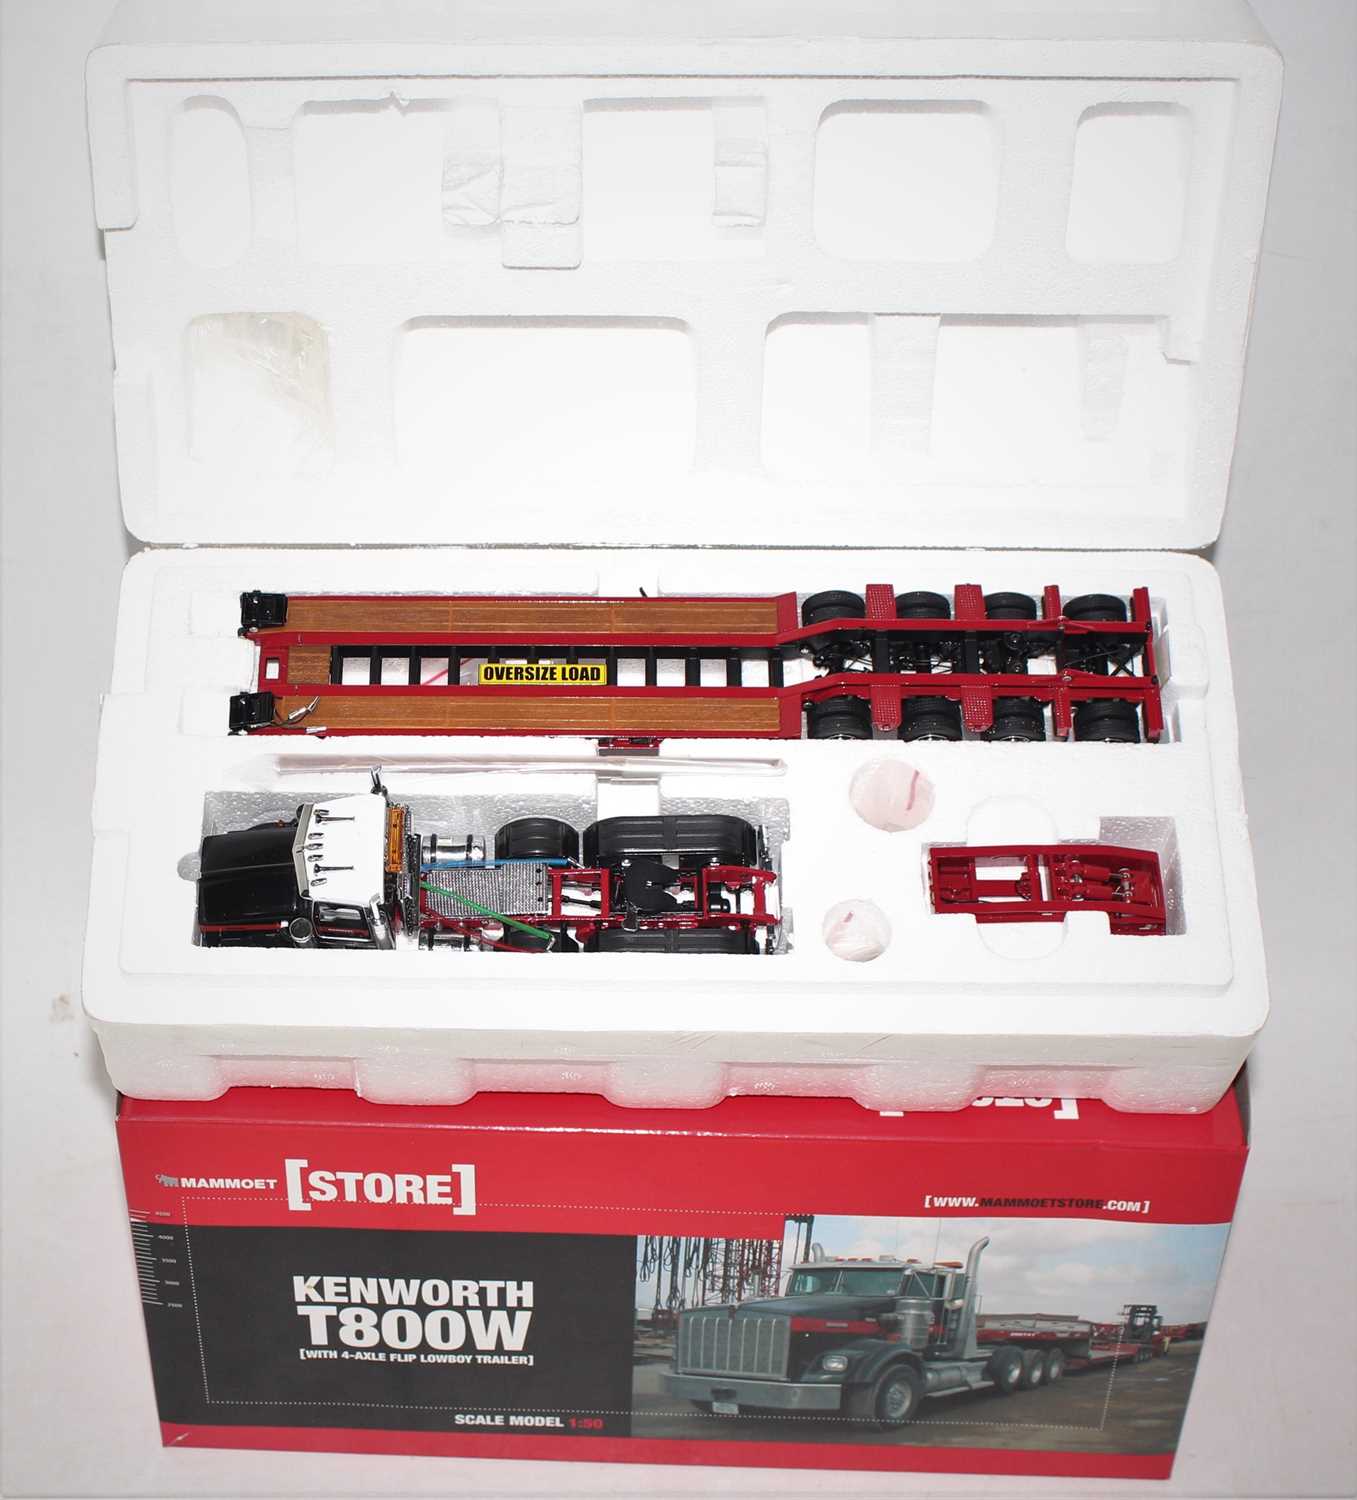 A Sword Precision Models model No. 410010 1/50 scale boxed diecast model of a Mammoet Kenworth